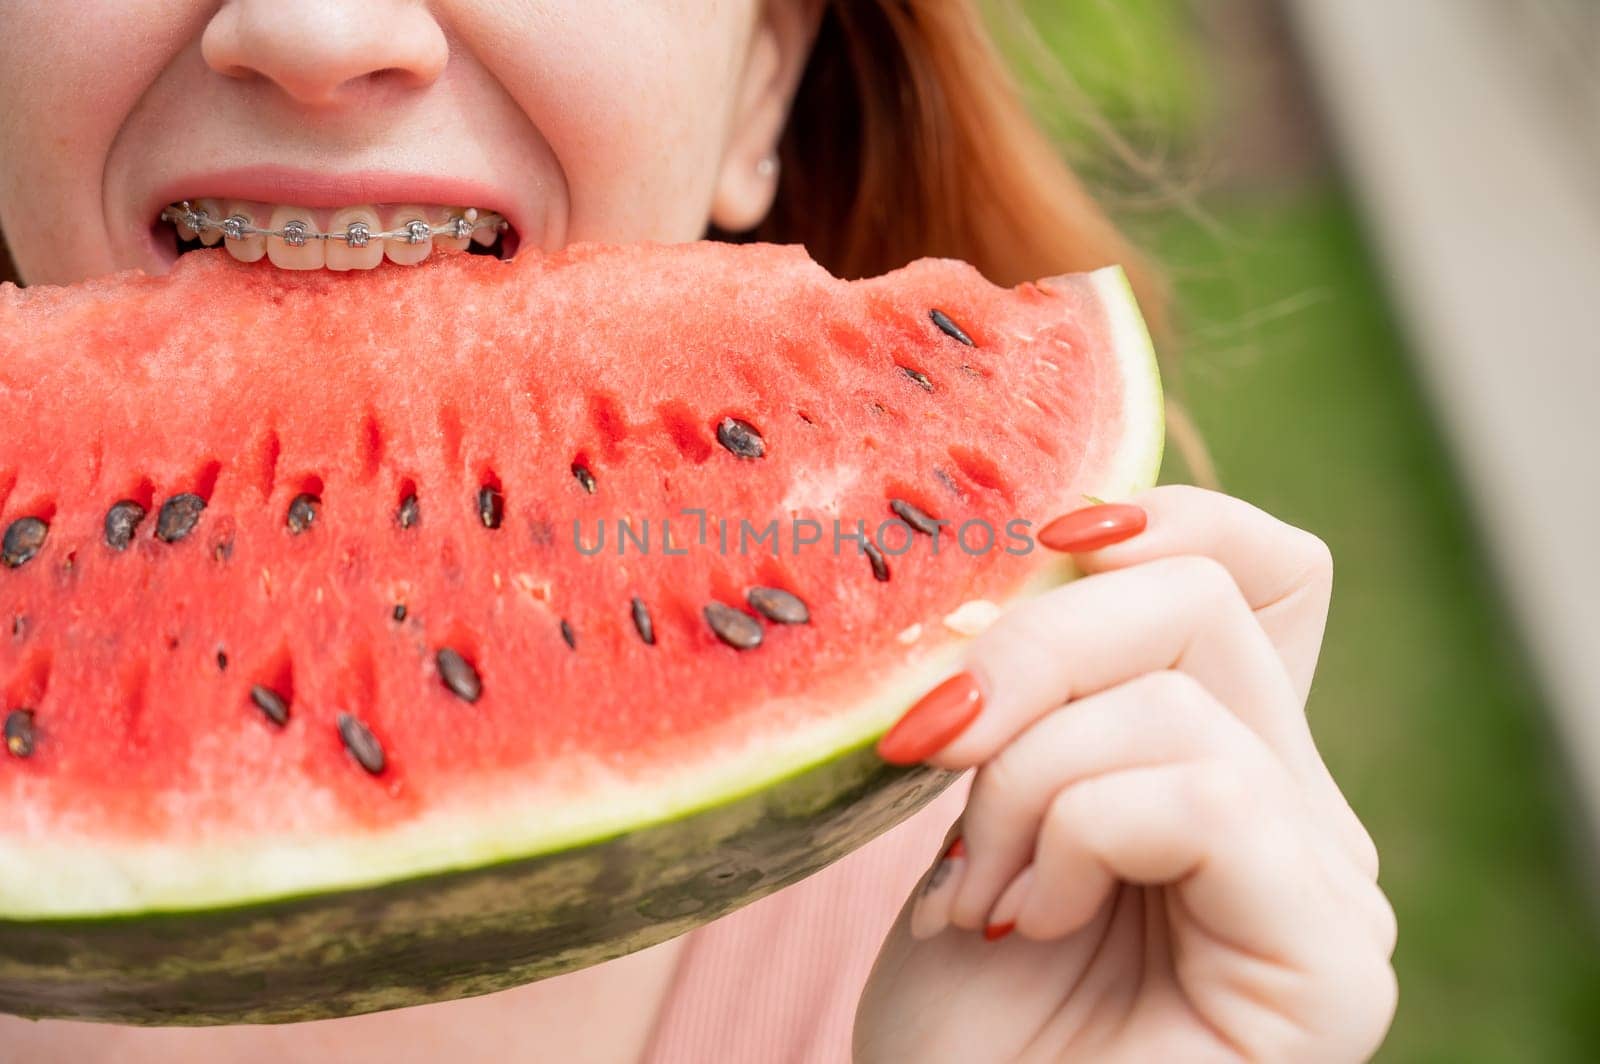 Close-up portrait of red-haired young woman with braces eating watermelon outdoors by mrwed54